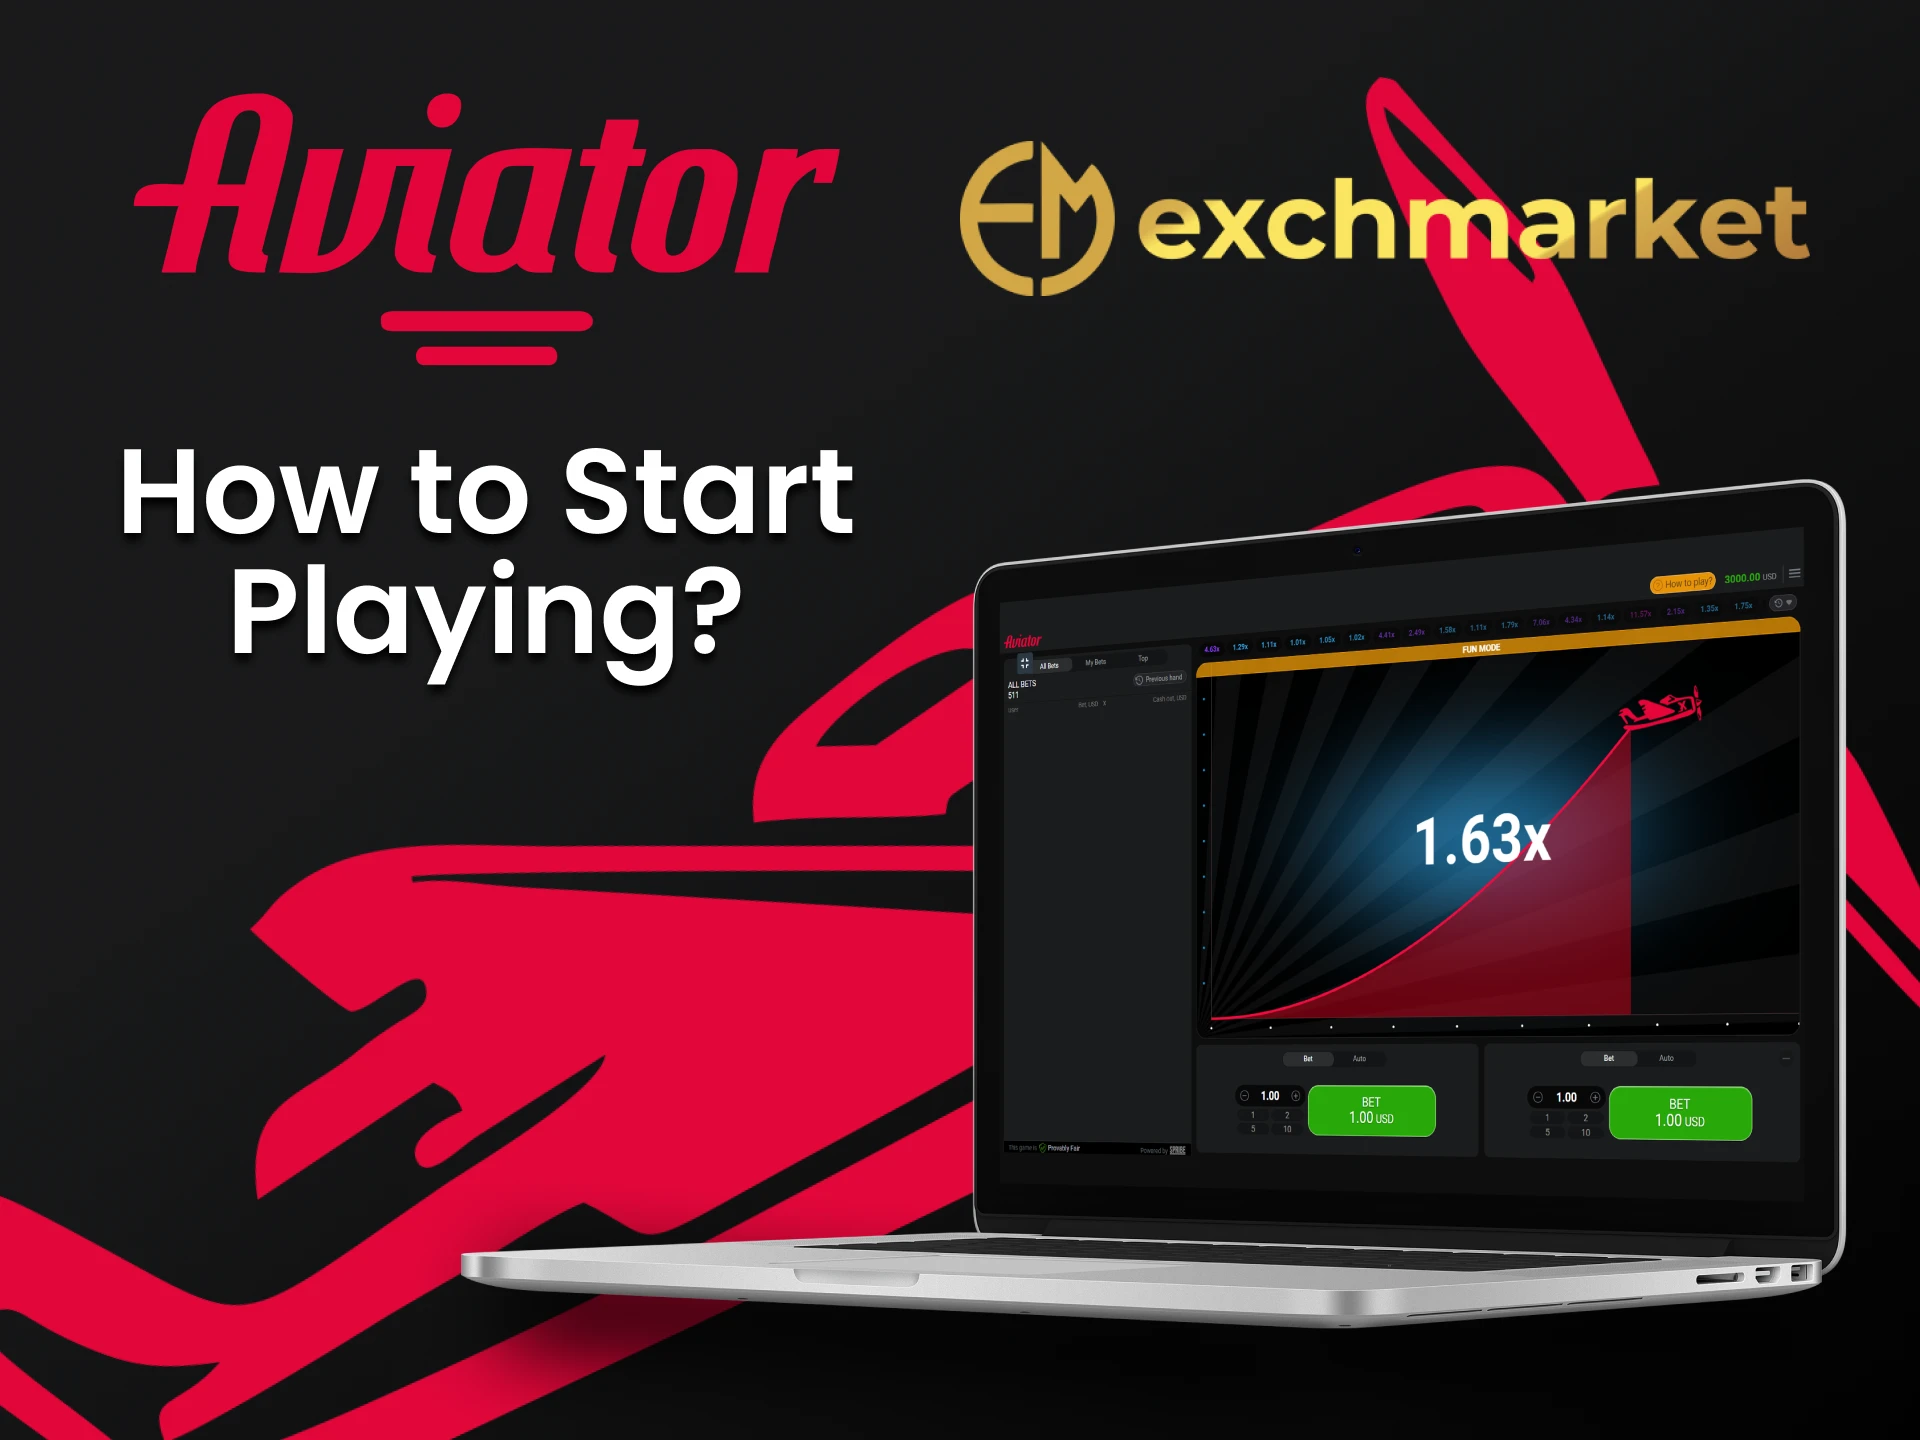 To start playing choose the section with Aviator on Exchmarket.